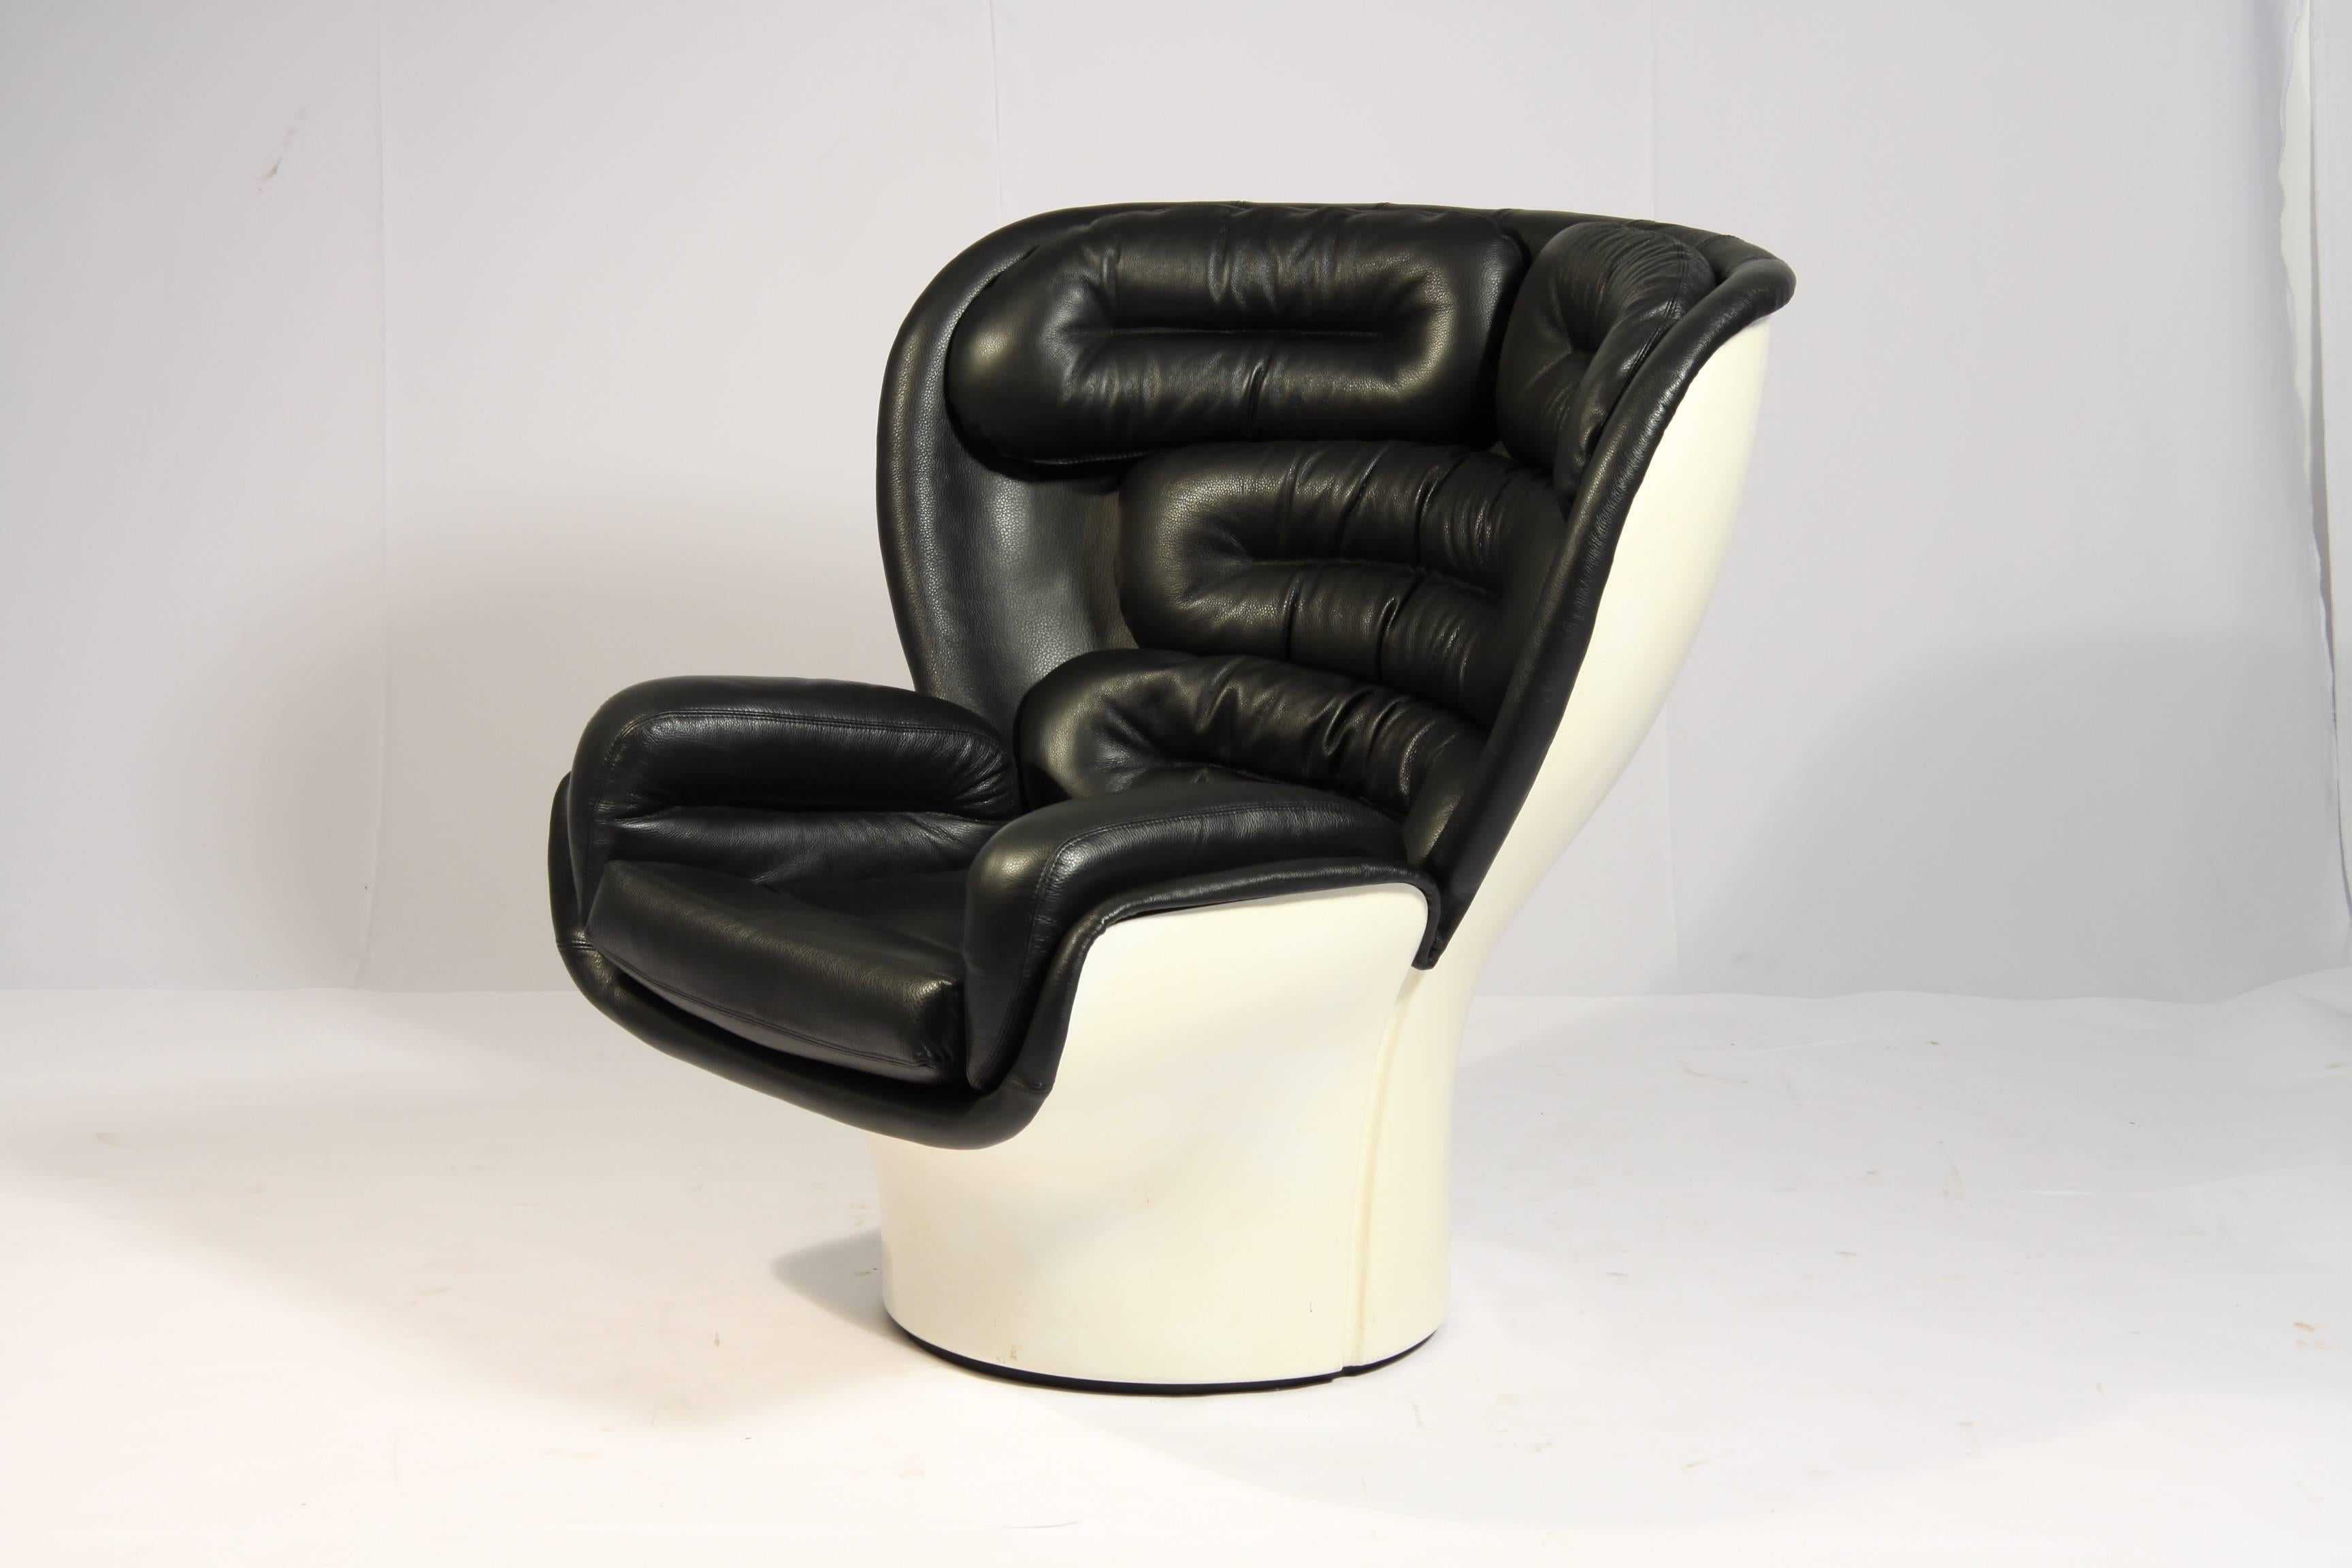 The Elda lounge chair was designed in 1963 and is made of a fiberglass shell with a rotating base, the seat is padded with black leather covering. The iconic piece, designed by Joe Colombo, was very futuristic in design for the time it was produced.